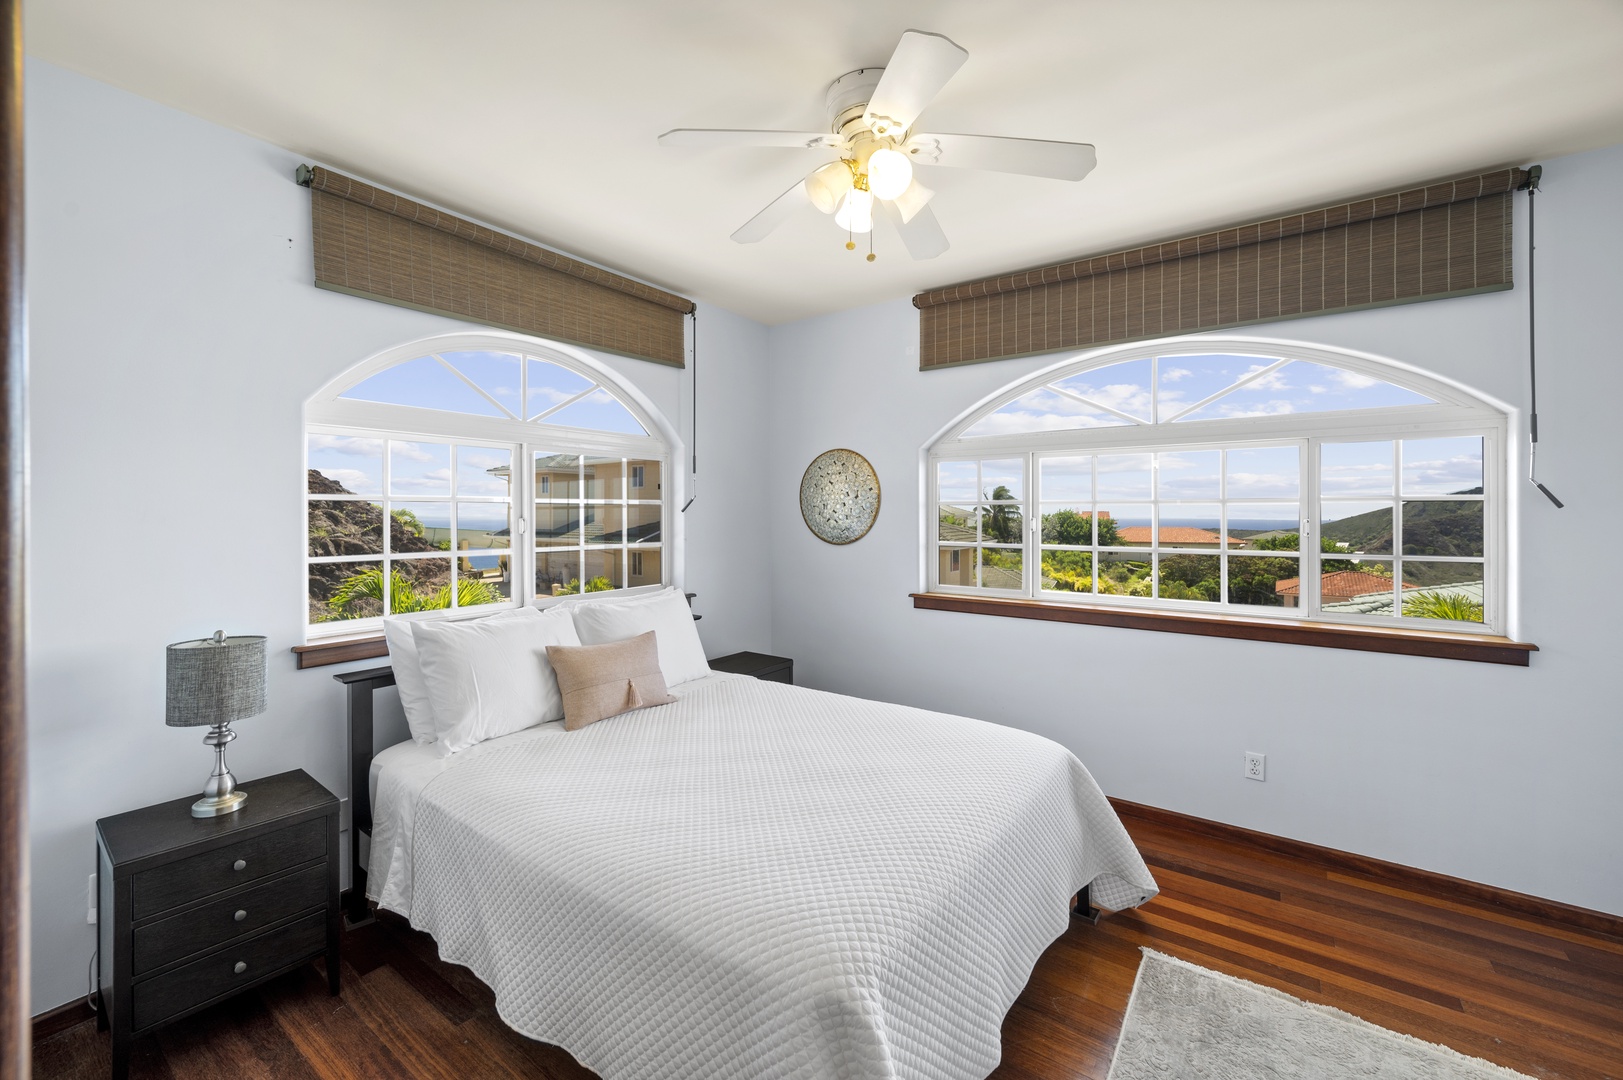 Honolulu Vacation Rentals, Lotus on a Hill* - Guest Bedroom 3 with queen bed, ceiling fan, mountain views, and an ensuite full bath